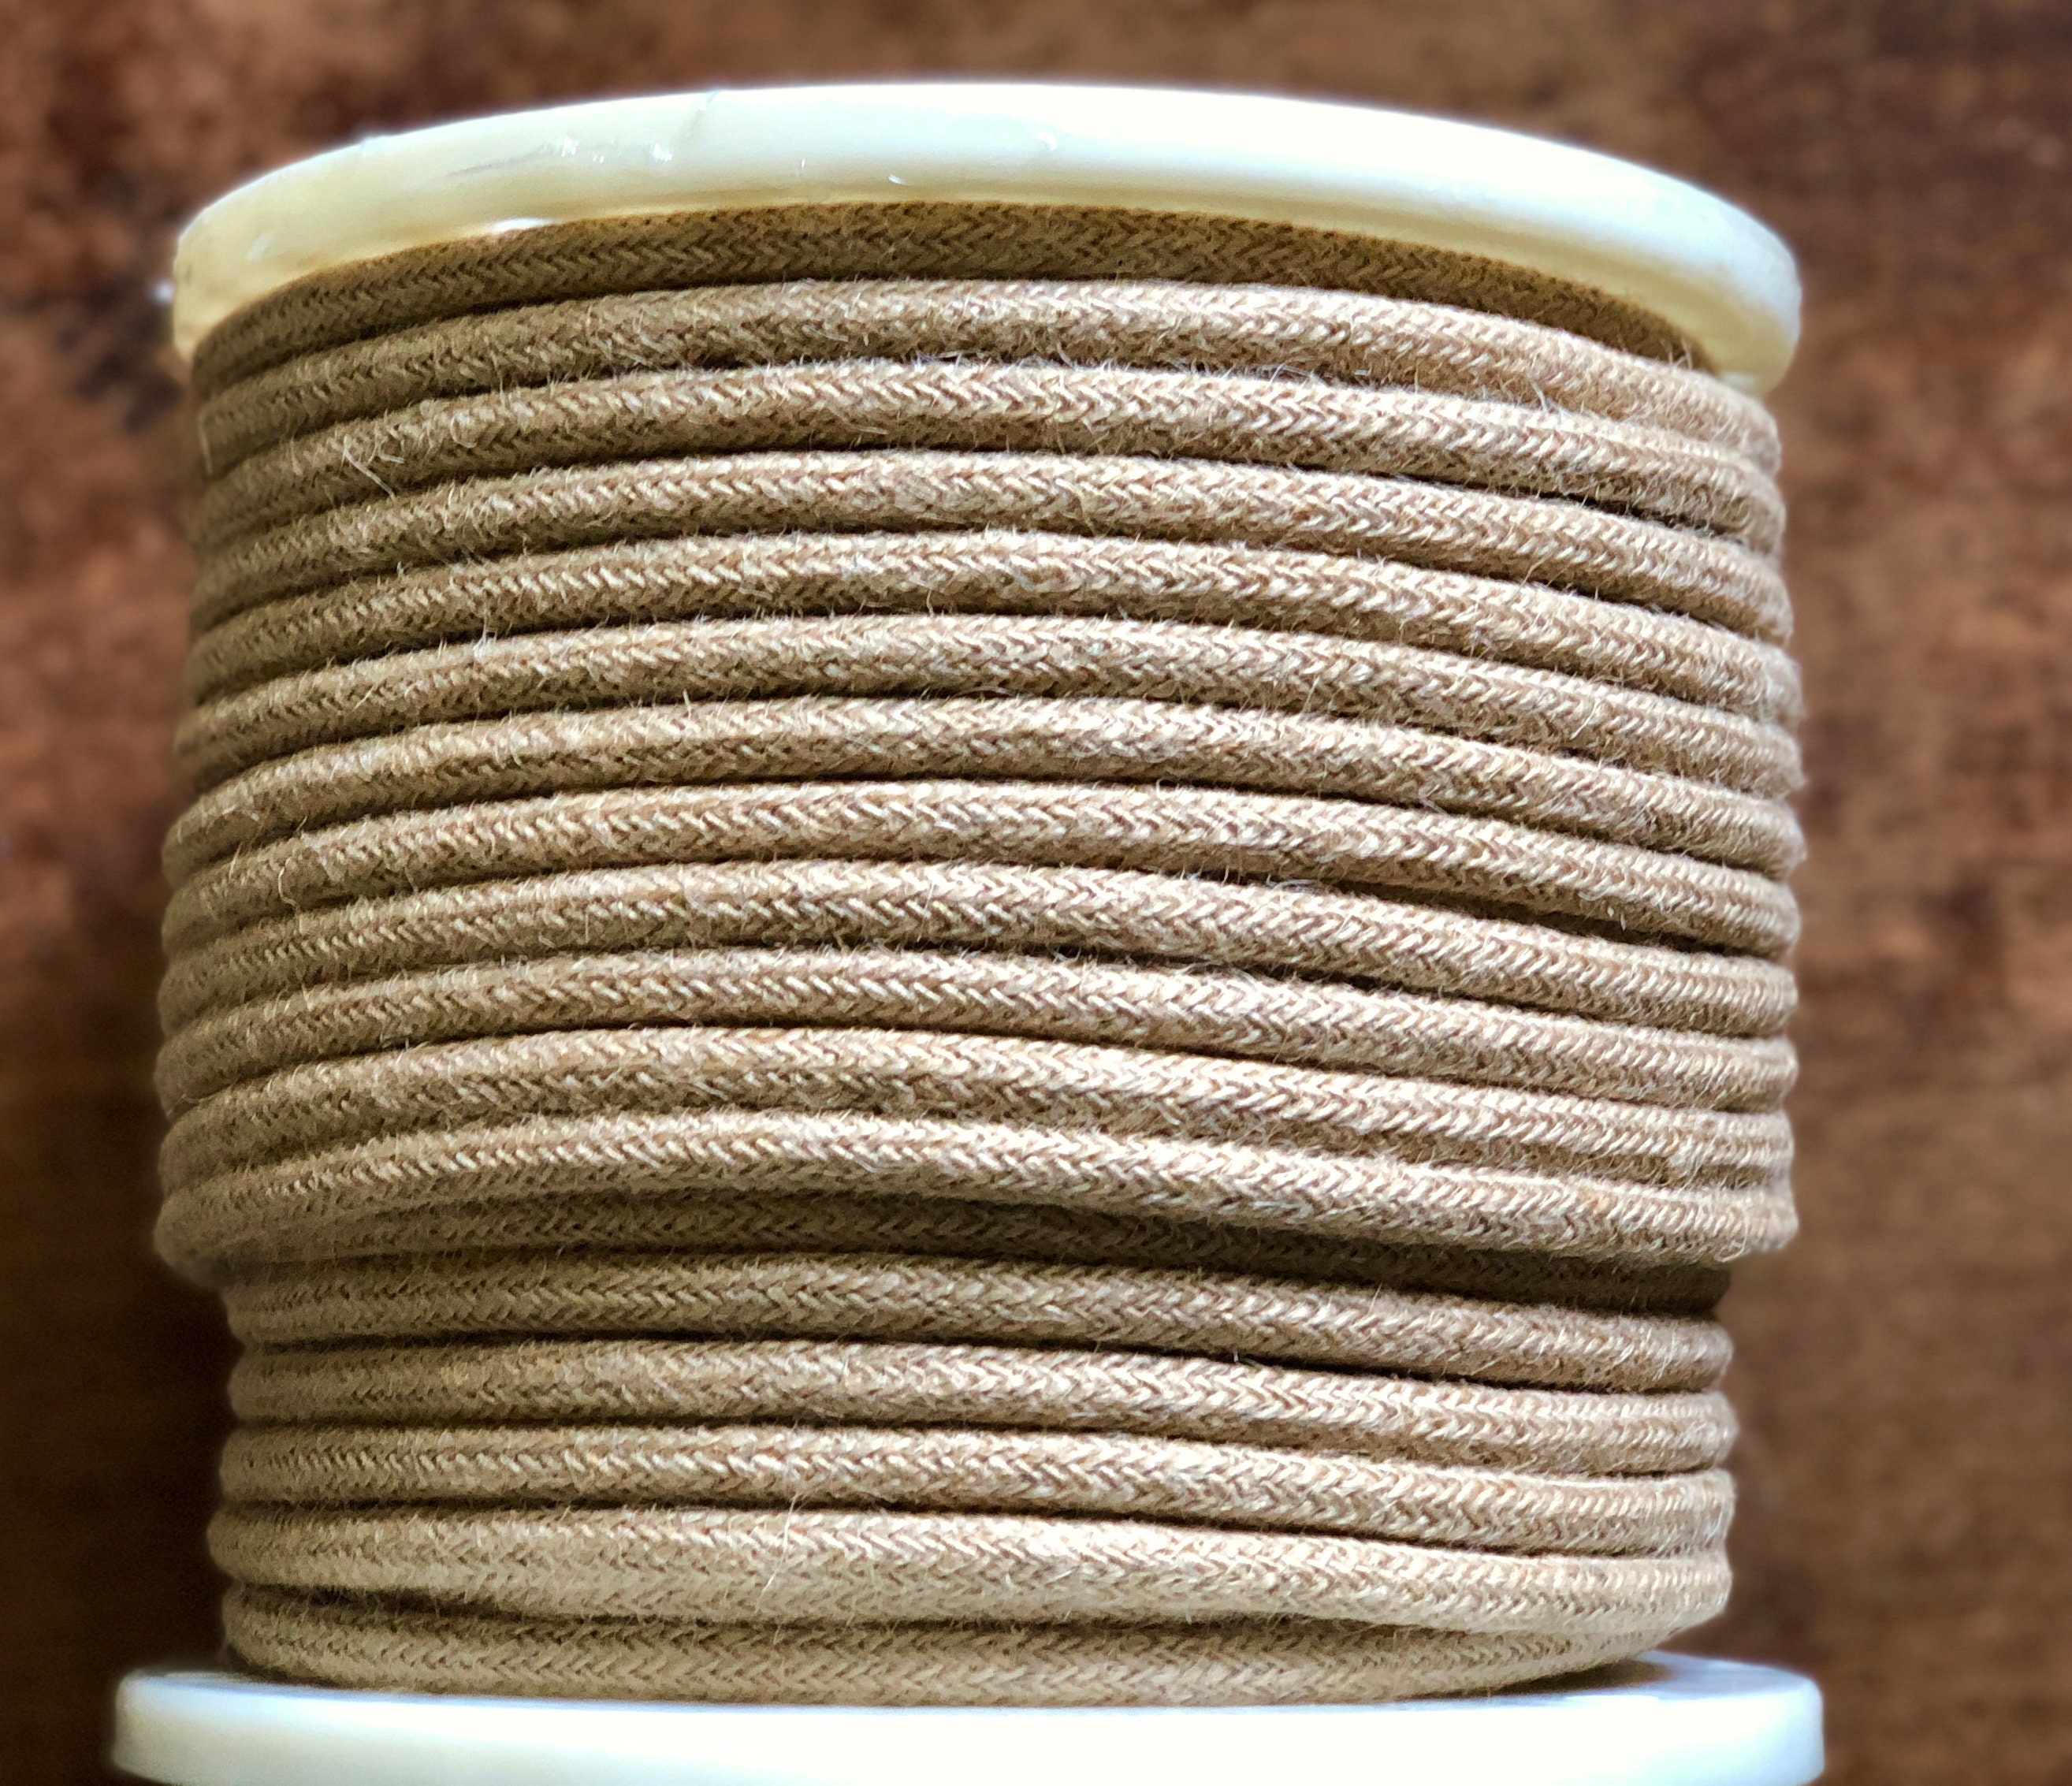 Wired Jute Twine 9 Yard Roll Choose Your Color 